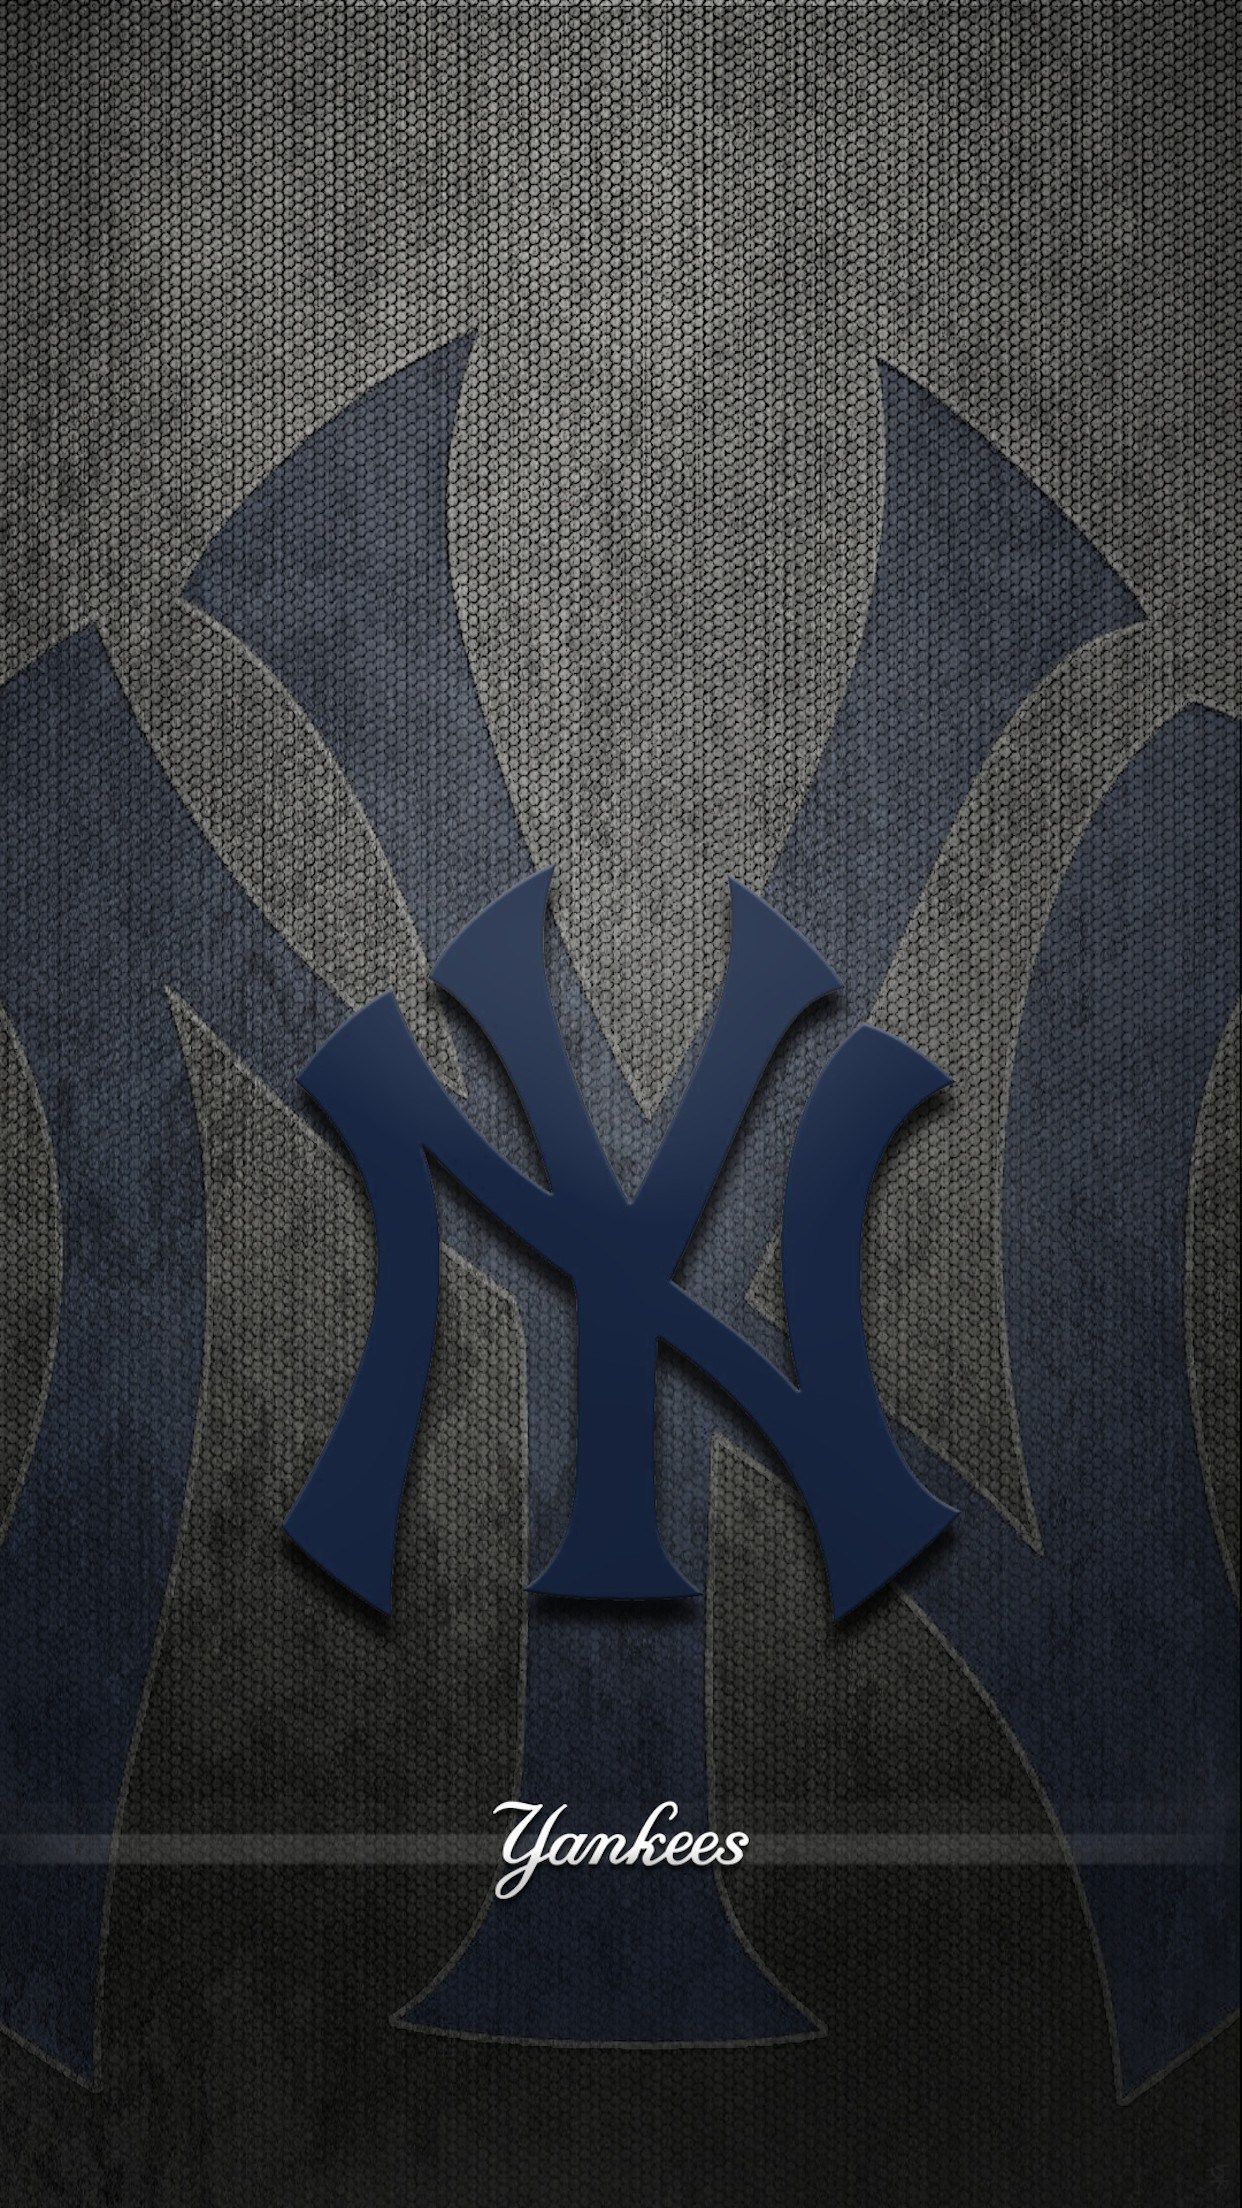 Download wallpapers New York Yankees yellow logo, 4k, yellow brickwall, New  York Yankees logo, american baseball team, New York Yankees neon logo, NY  Yankees, New York Yankees for desktop free. Pictures for